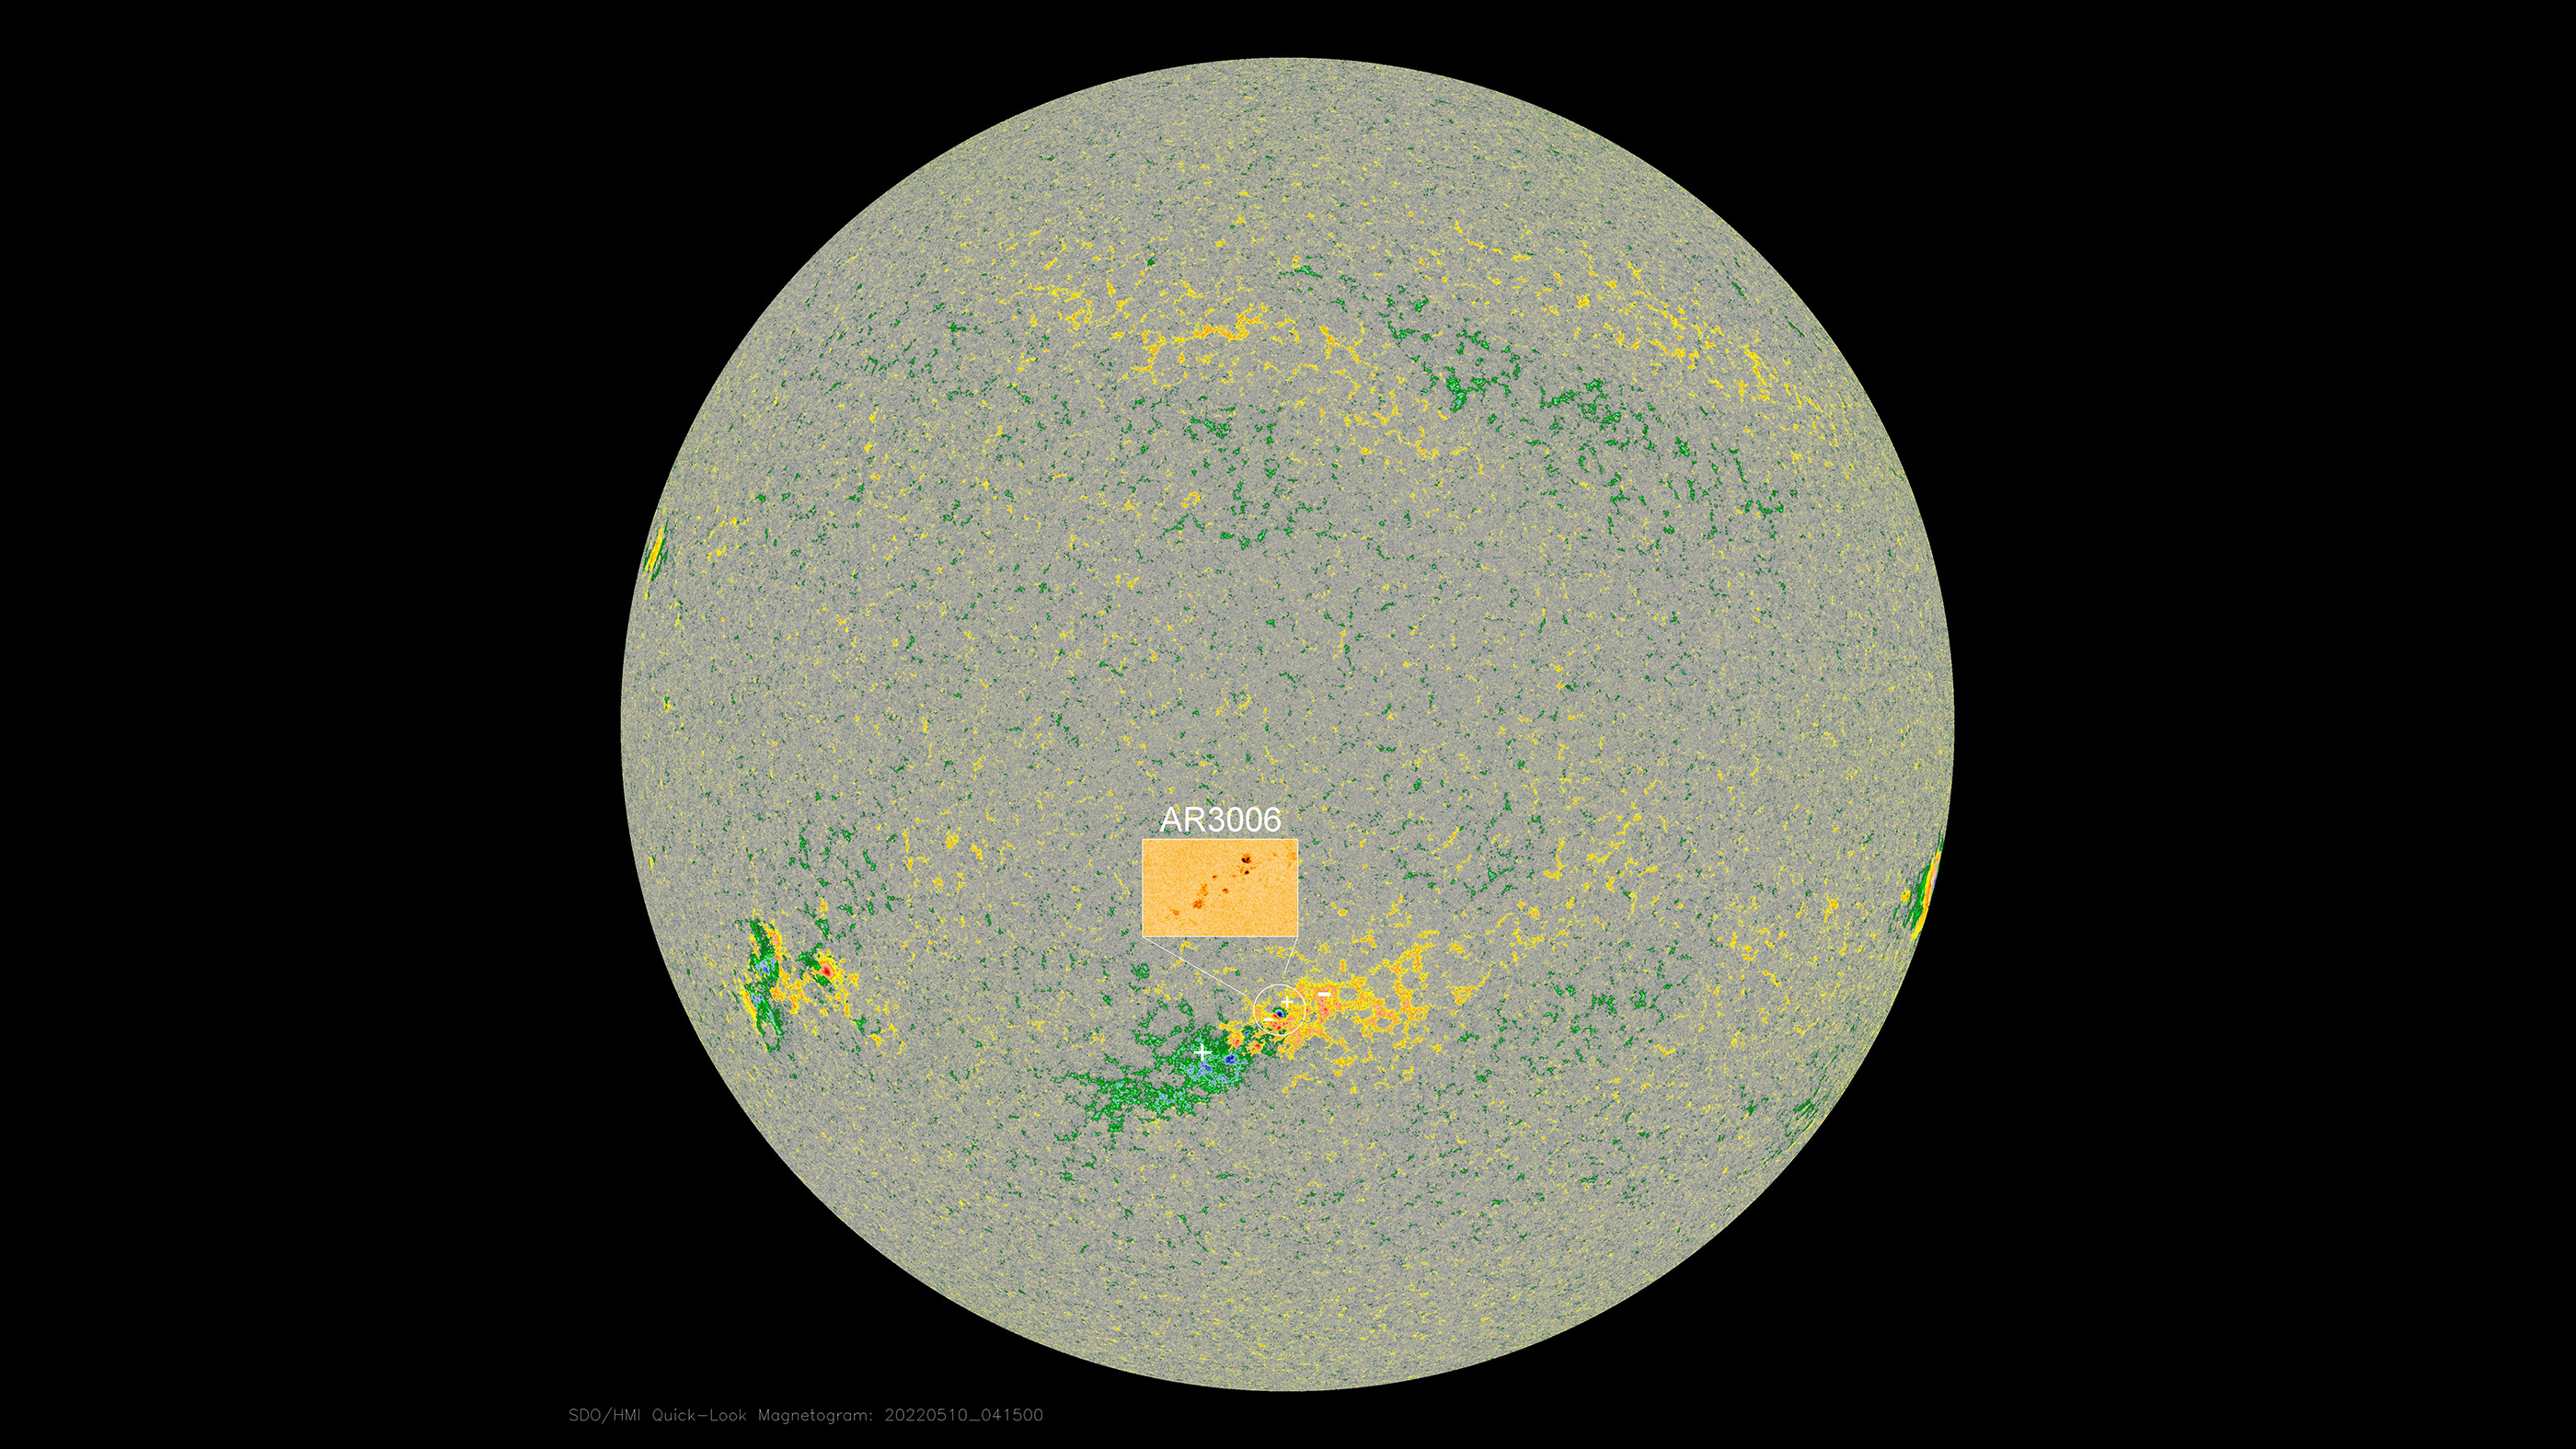 The AR3006 sunspot region was first seen a few days ago and has now rotated near the center of the sun's visible disk, pointing almost directly at Earth.